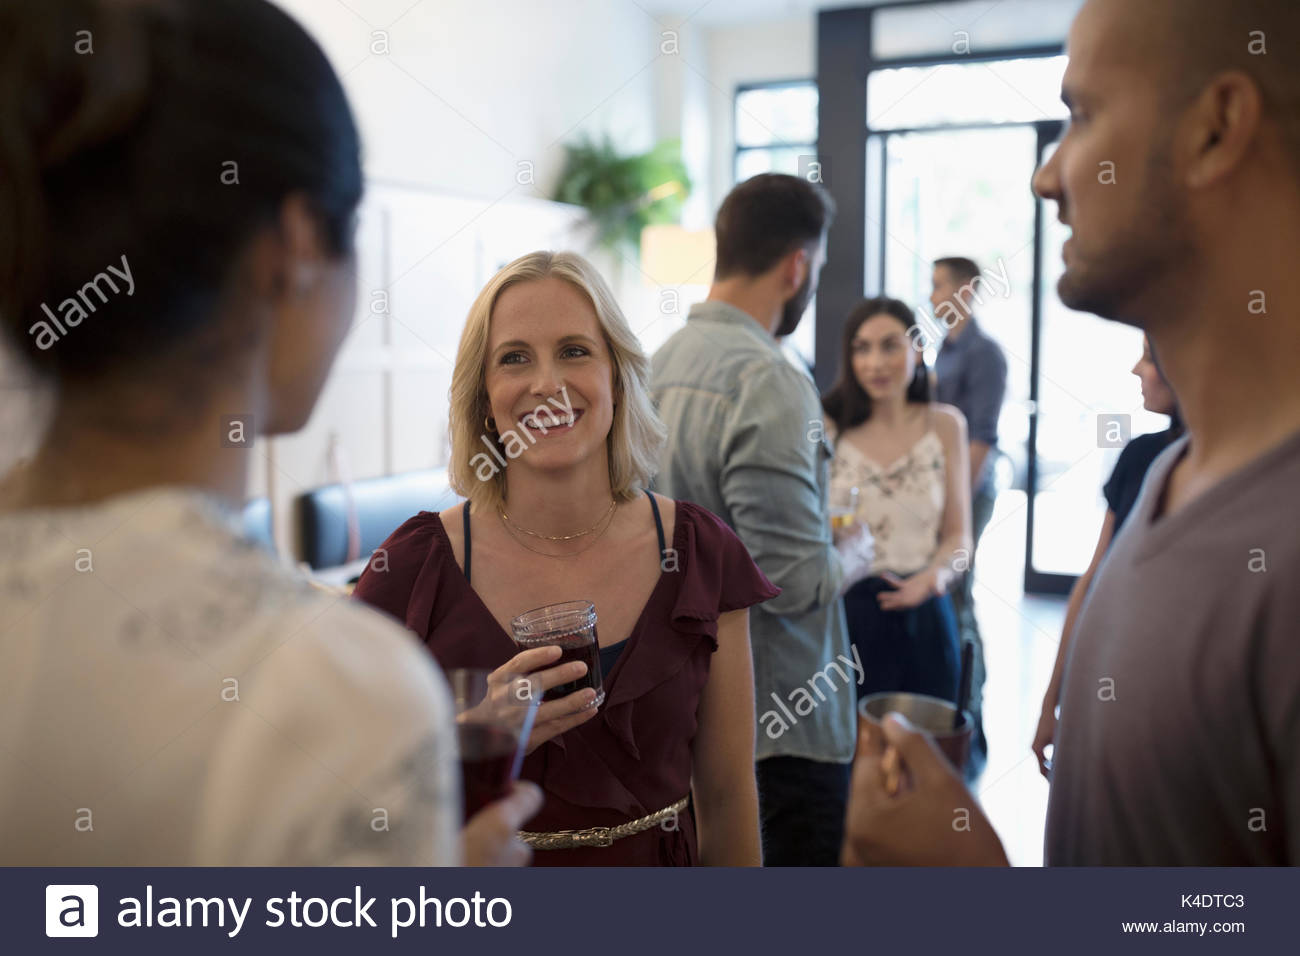 Friends talking and drinking wine, socializing in bar Stock Photo